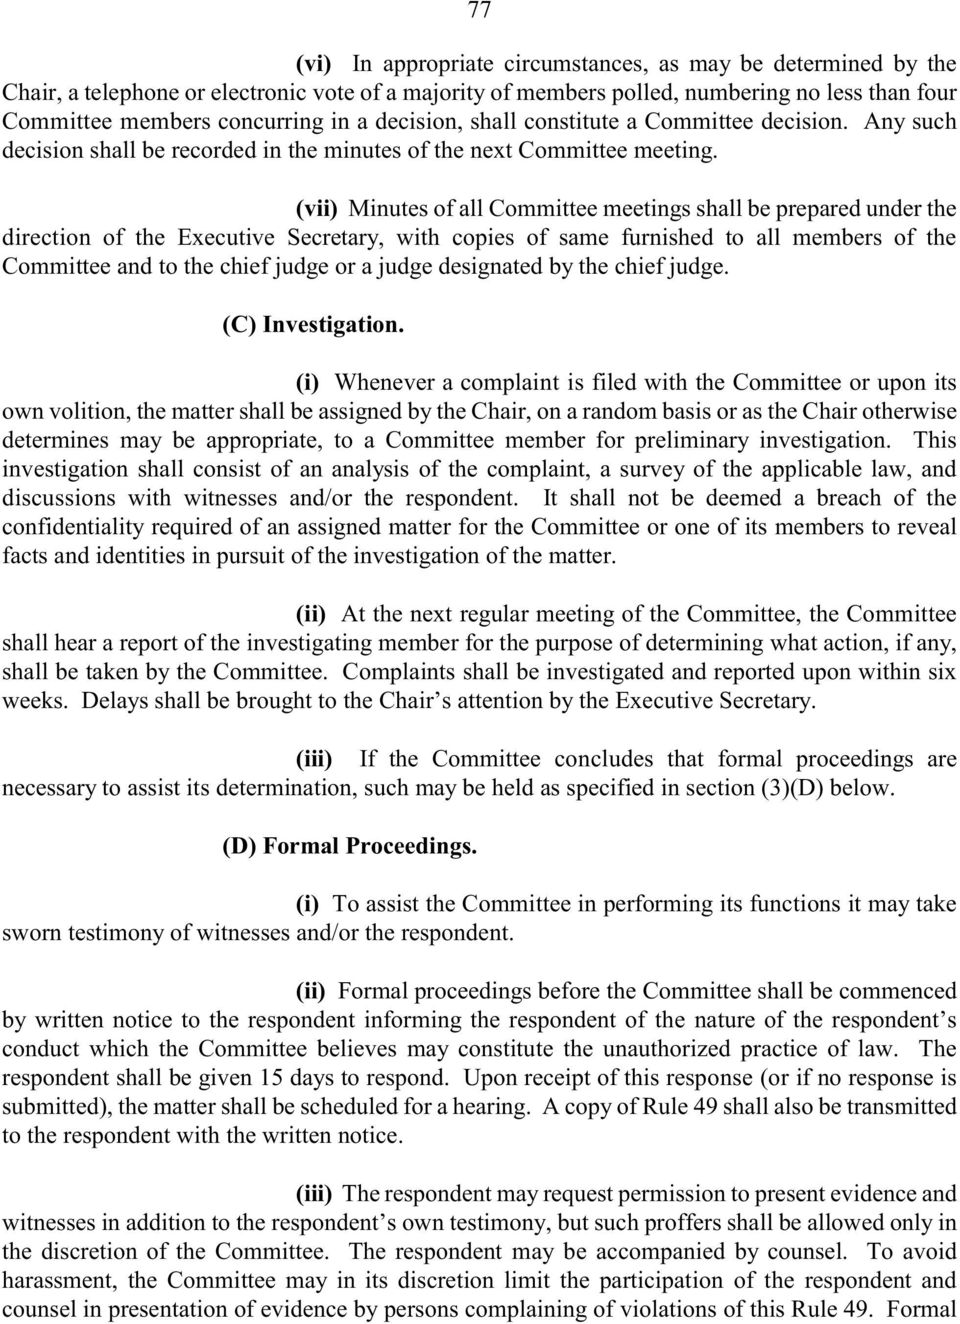 (vii) Minutes of all Committee meetings shall be prepared under the direction of the Executive Secretary, with copies of same furnished to all members of the Committee and to the chief judge or a